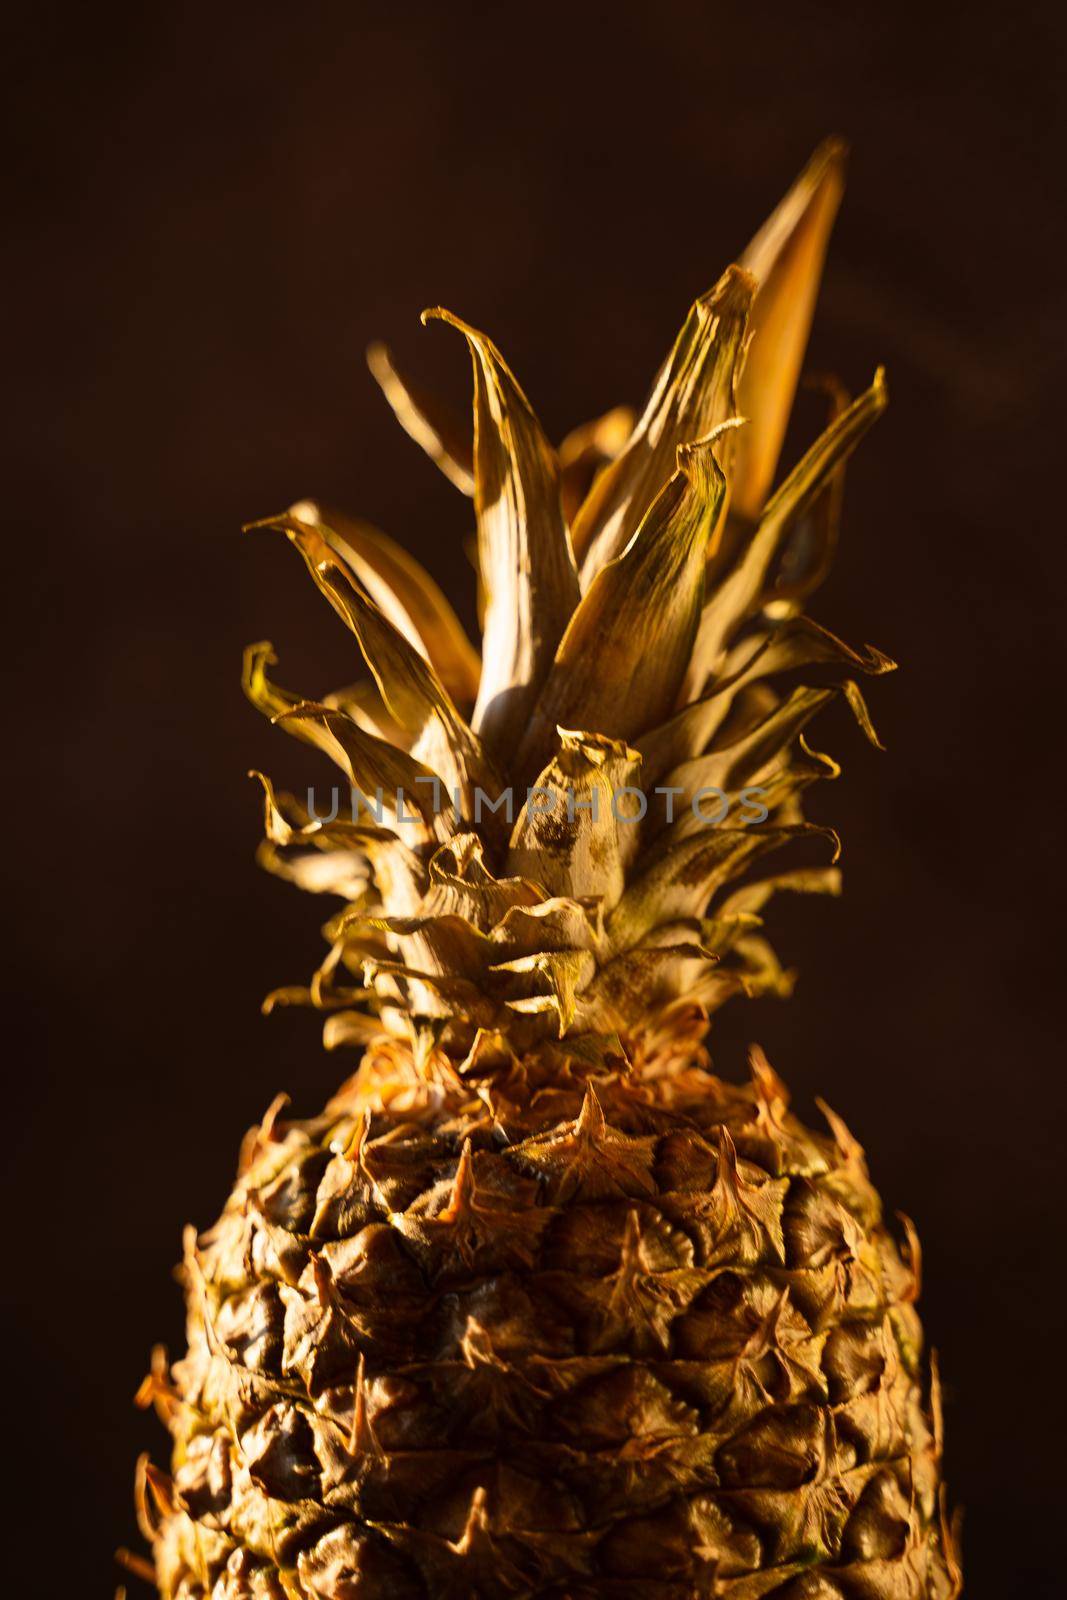 Pineapple tropical fruit on black background. Citrus fruit with vitamin c for helth care